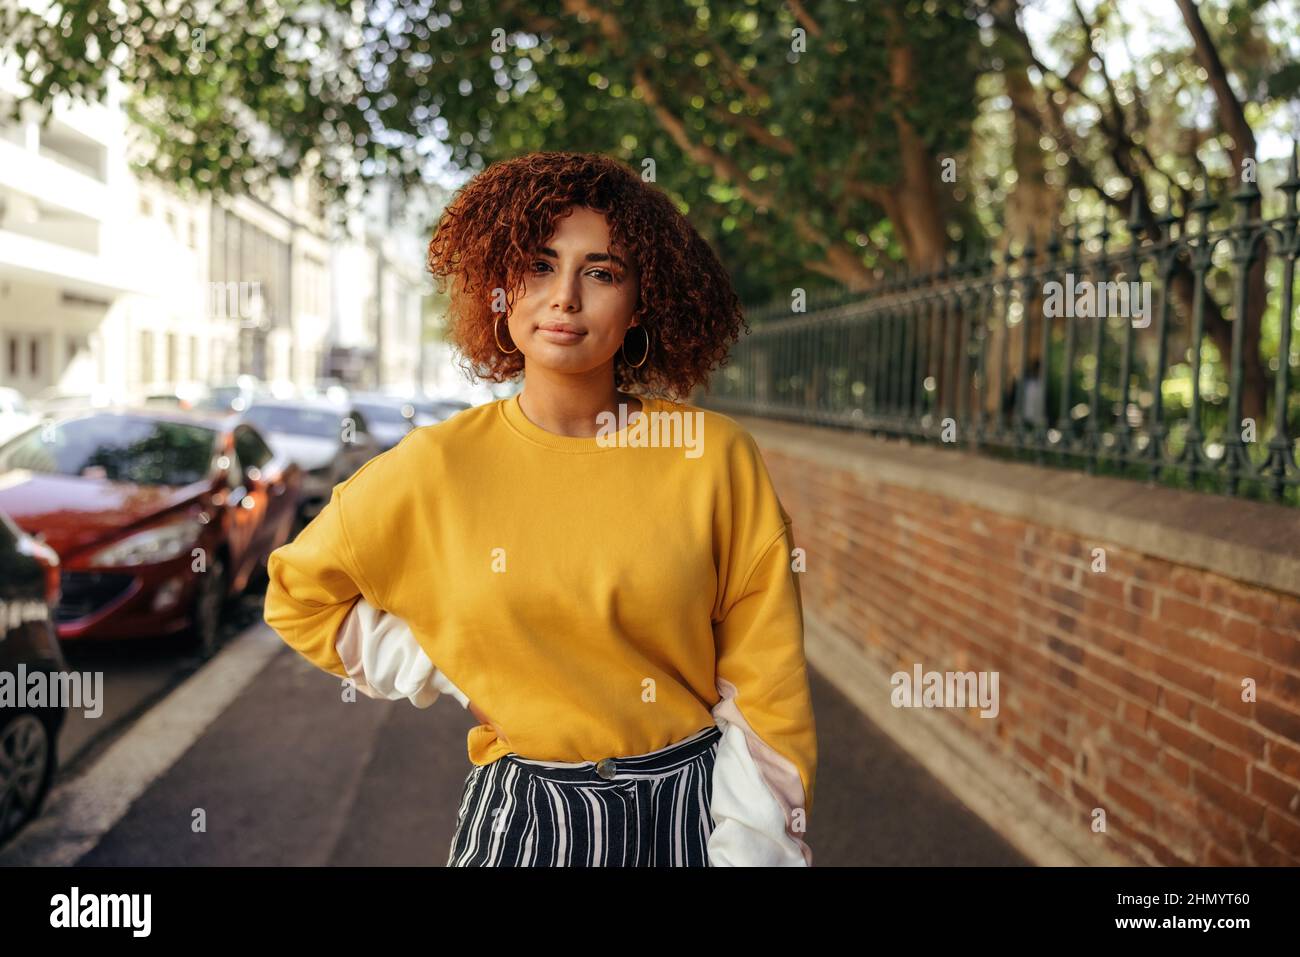 Carefree teenage girl standing on an urban sidewalk with her hand on her waist. Female youngster wearing red hair and a mustard sweatshirt in the city Stock Photo